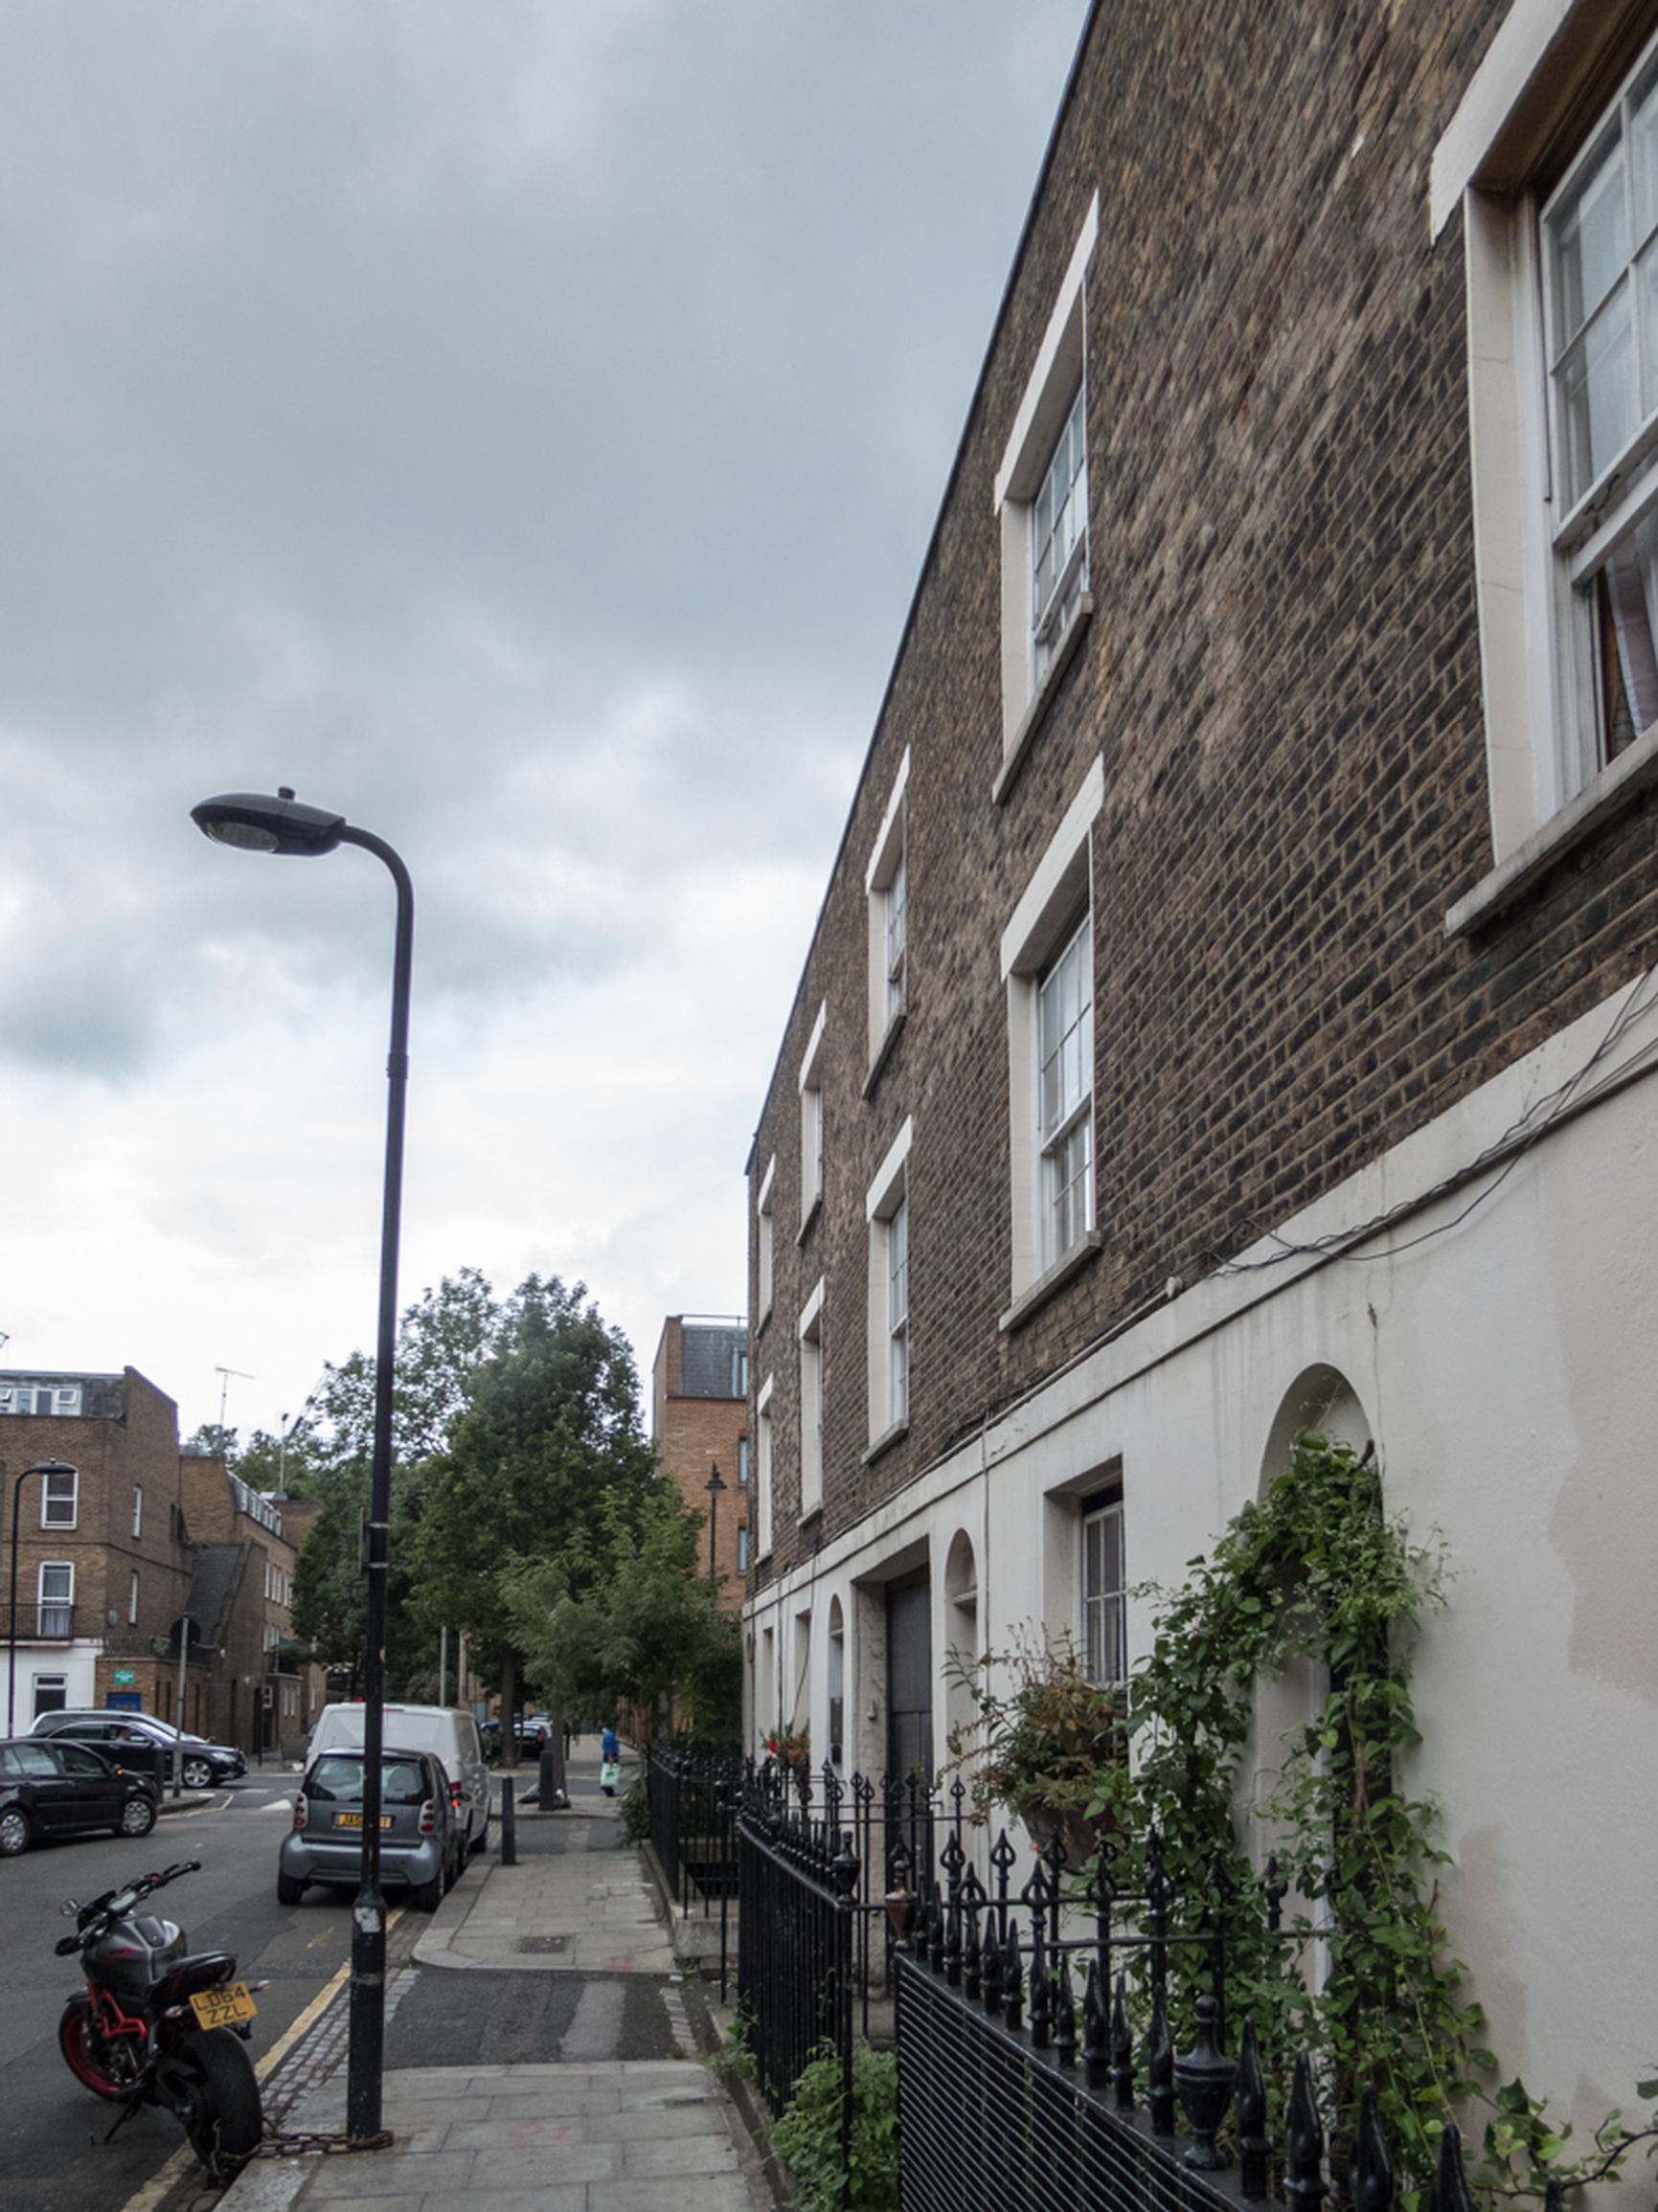 Cobourg Street: Camden says HS2 Ltd should fund the rehousing of tenants